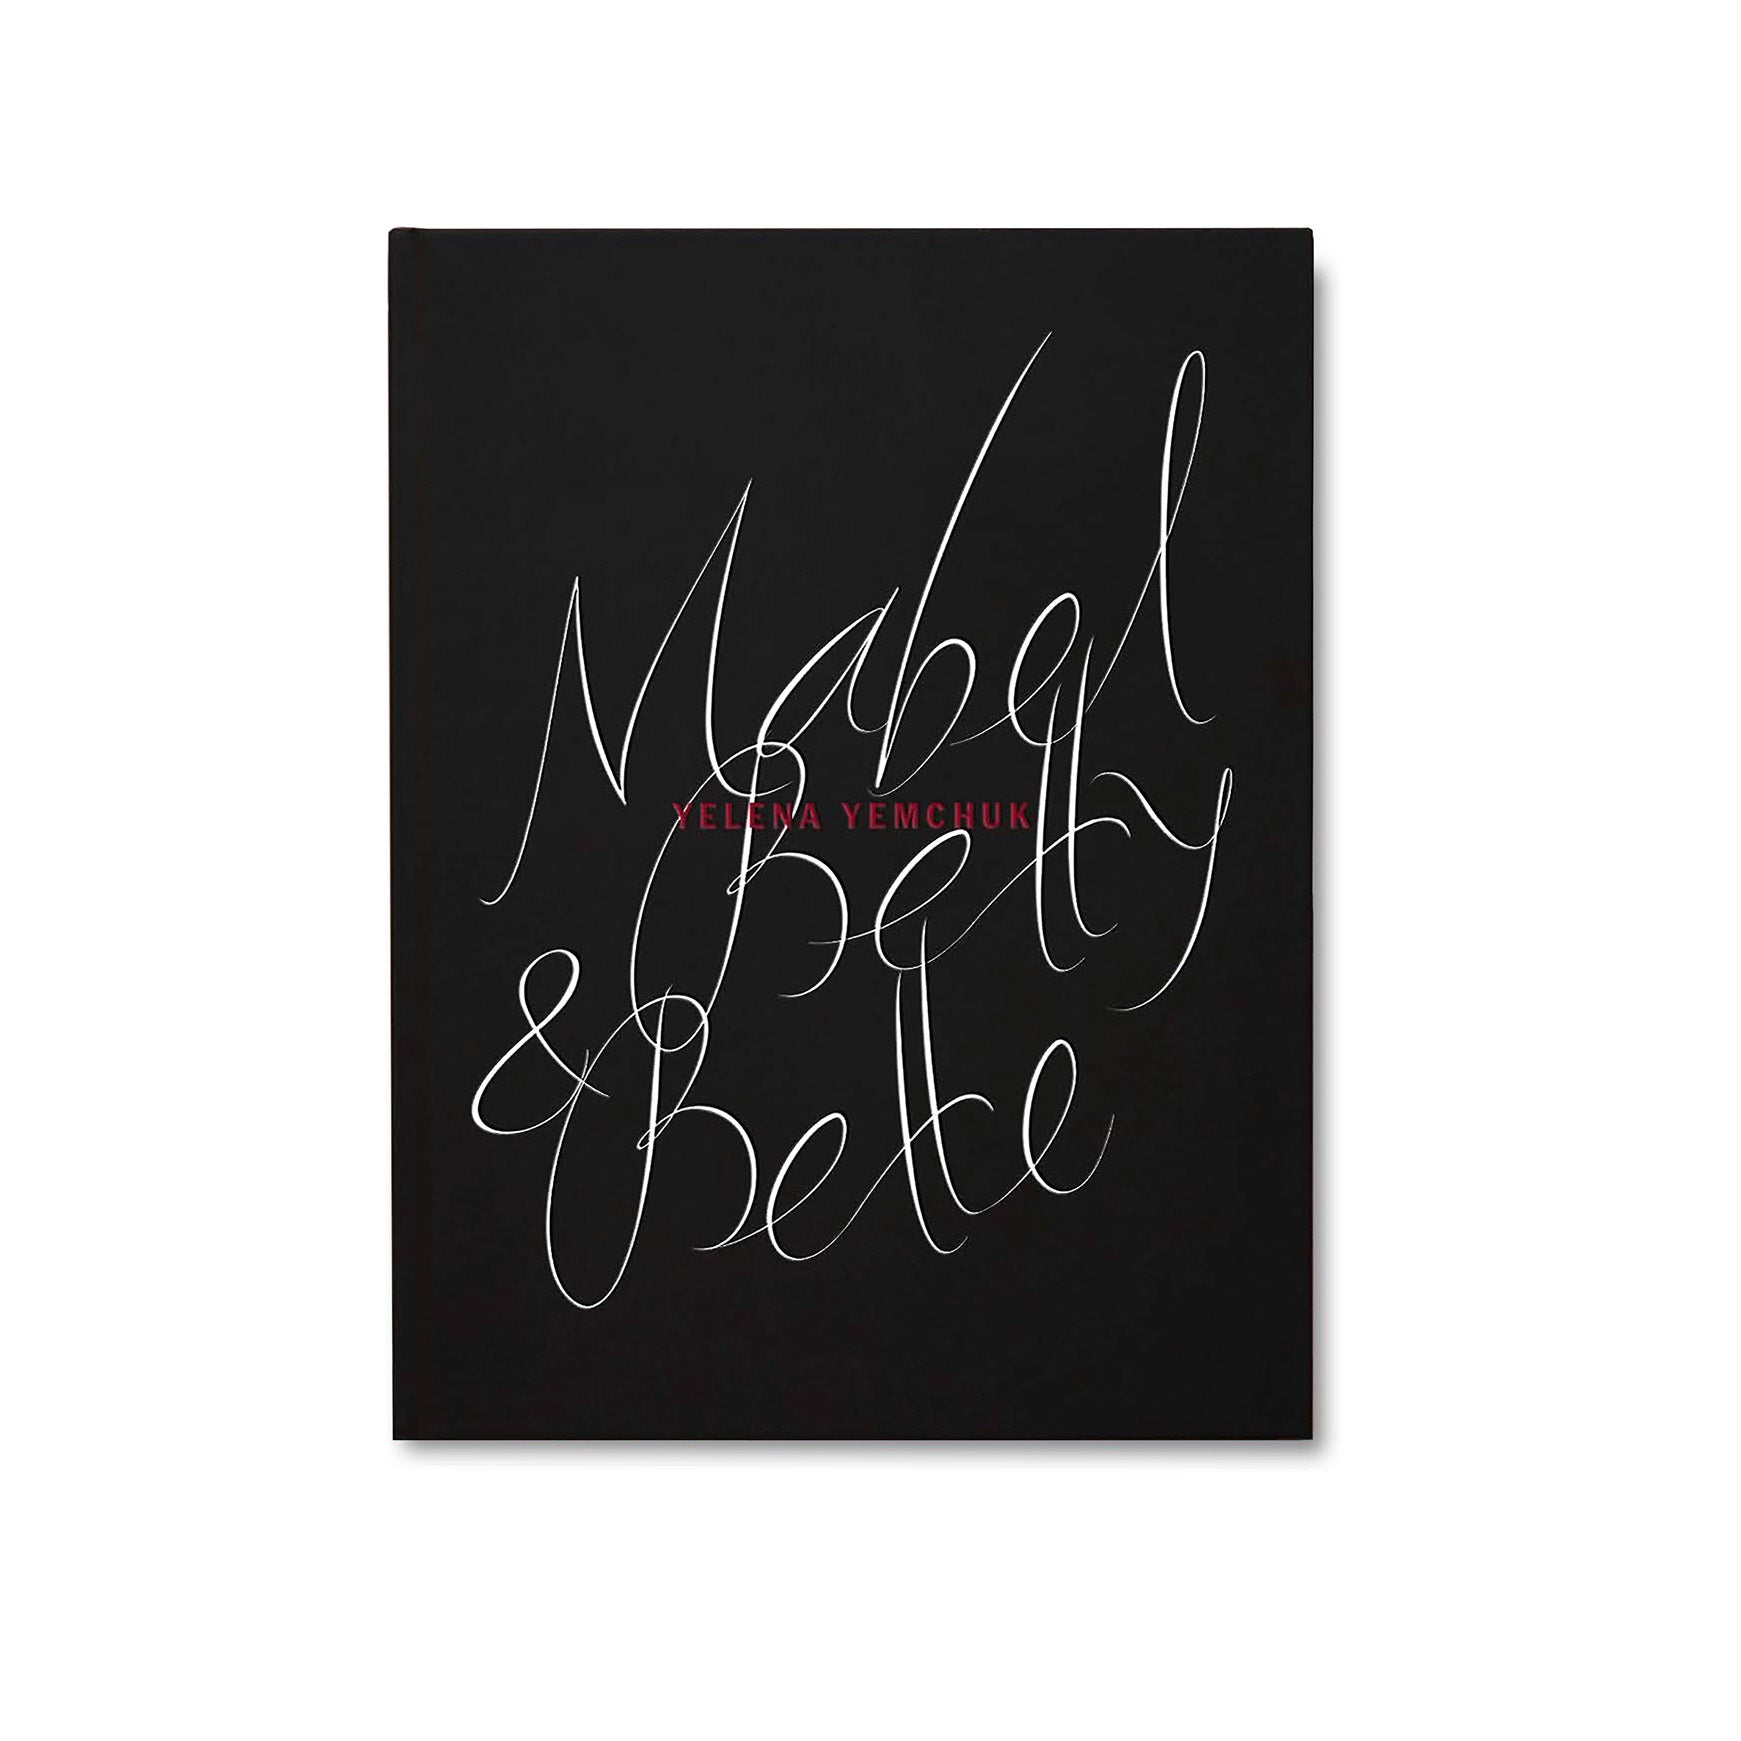 Mabel, Betty & Bette - signed copy